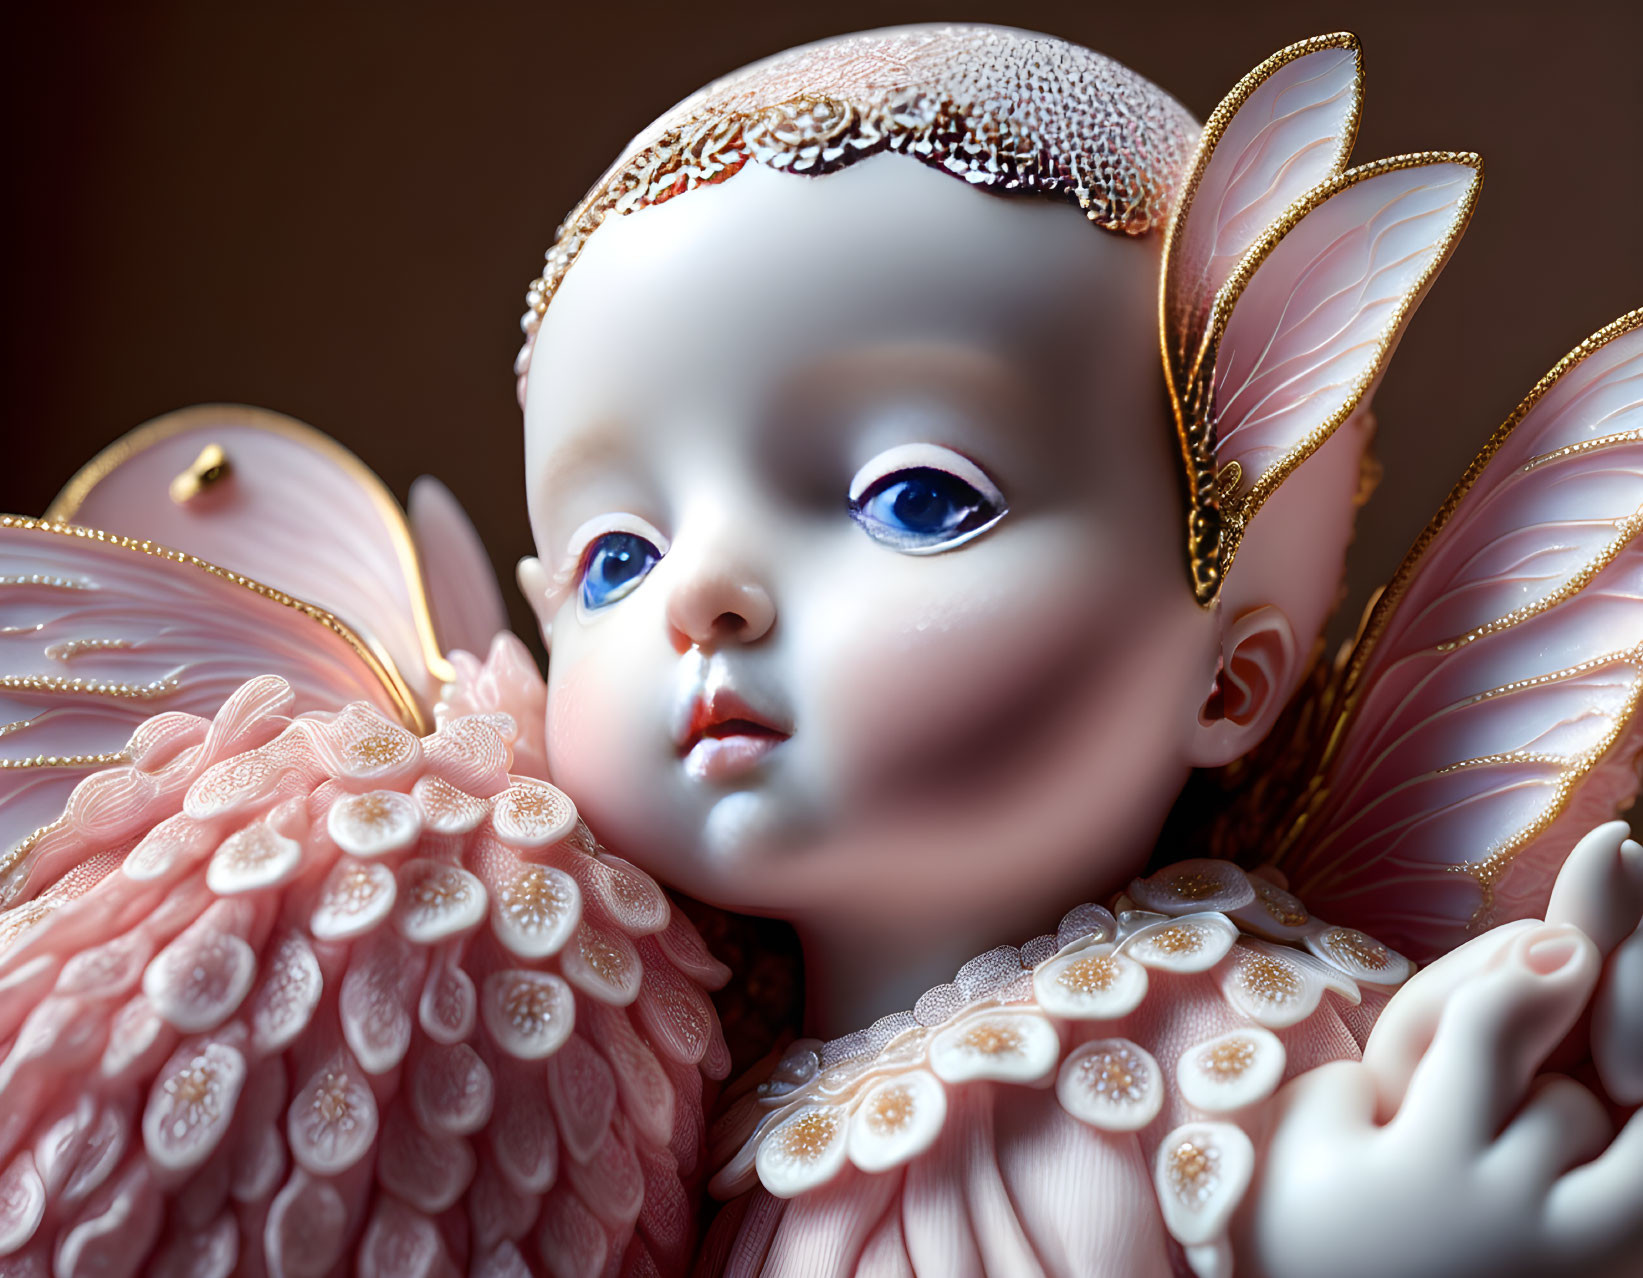 Porcelain angel figurine with pink wings and golden headband